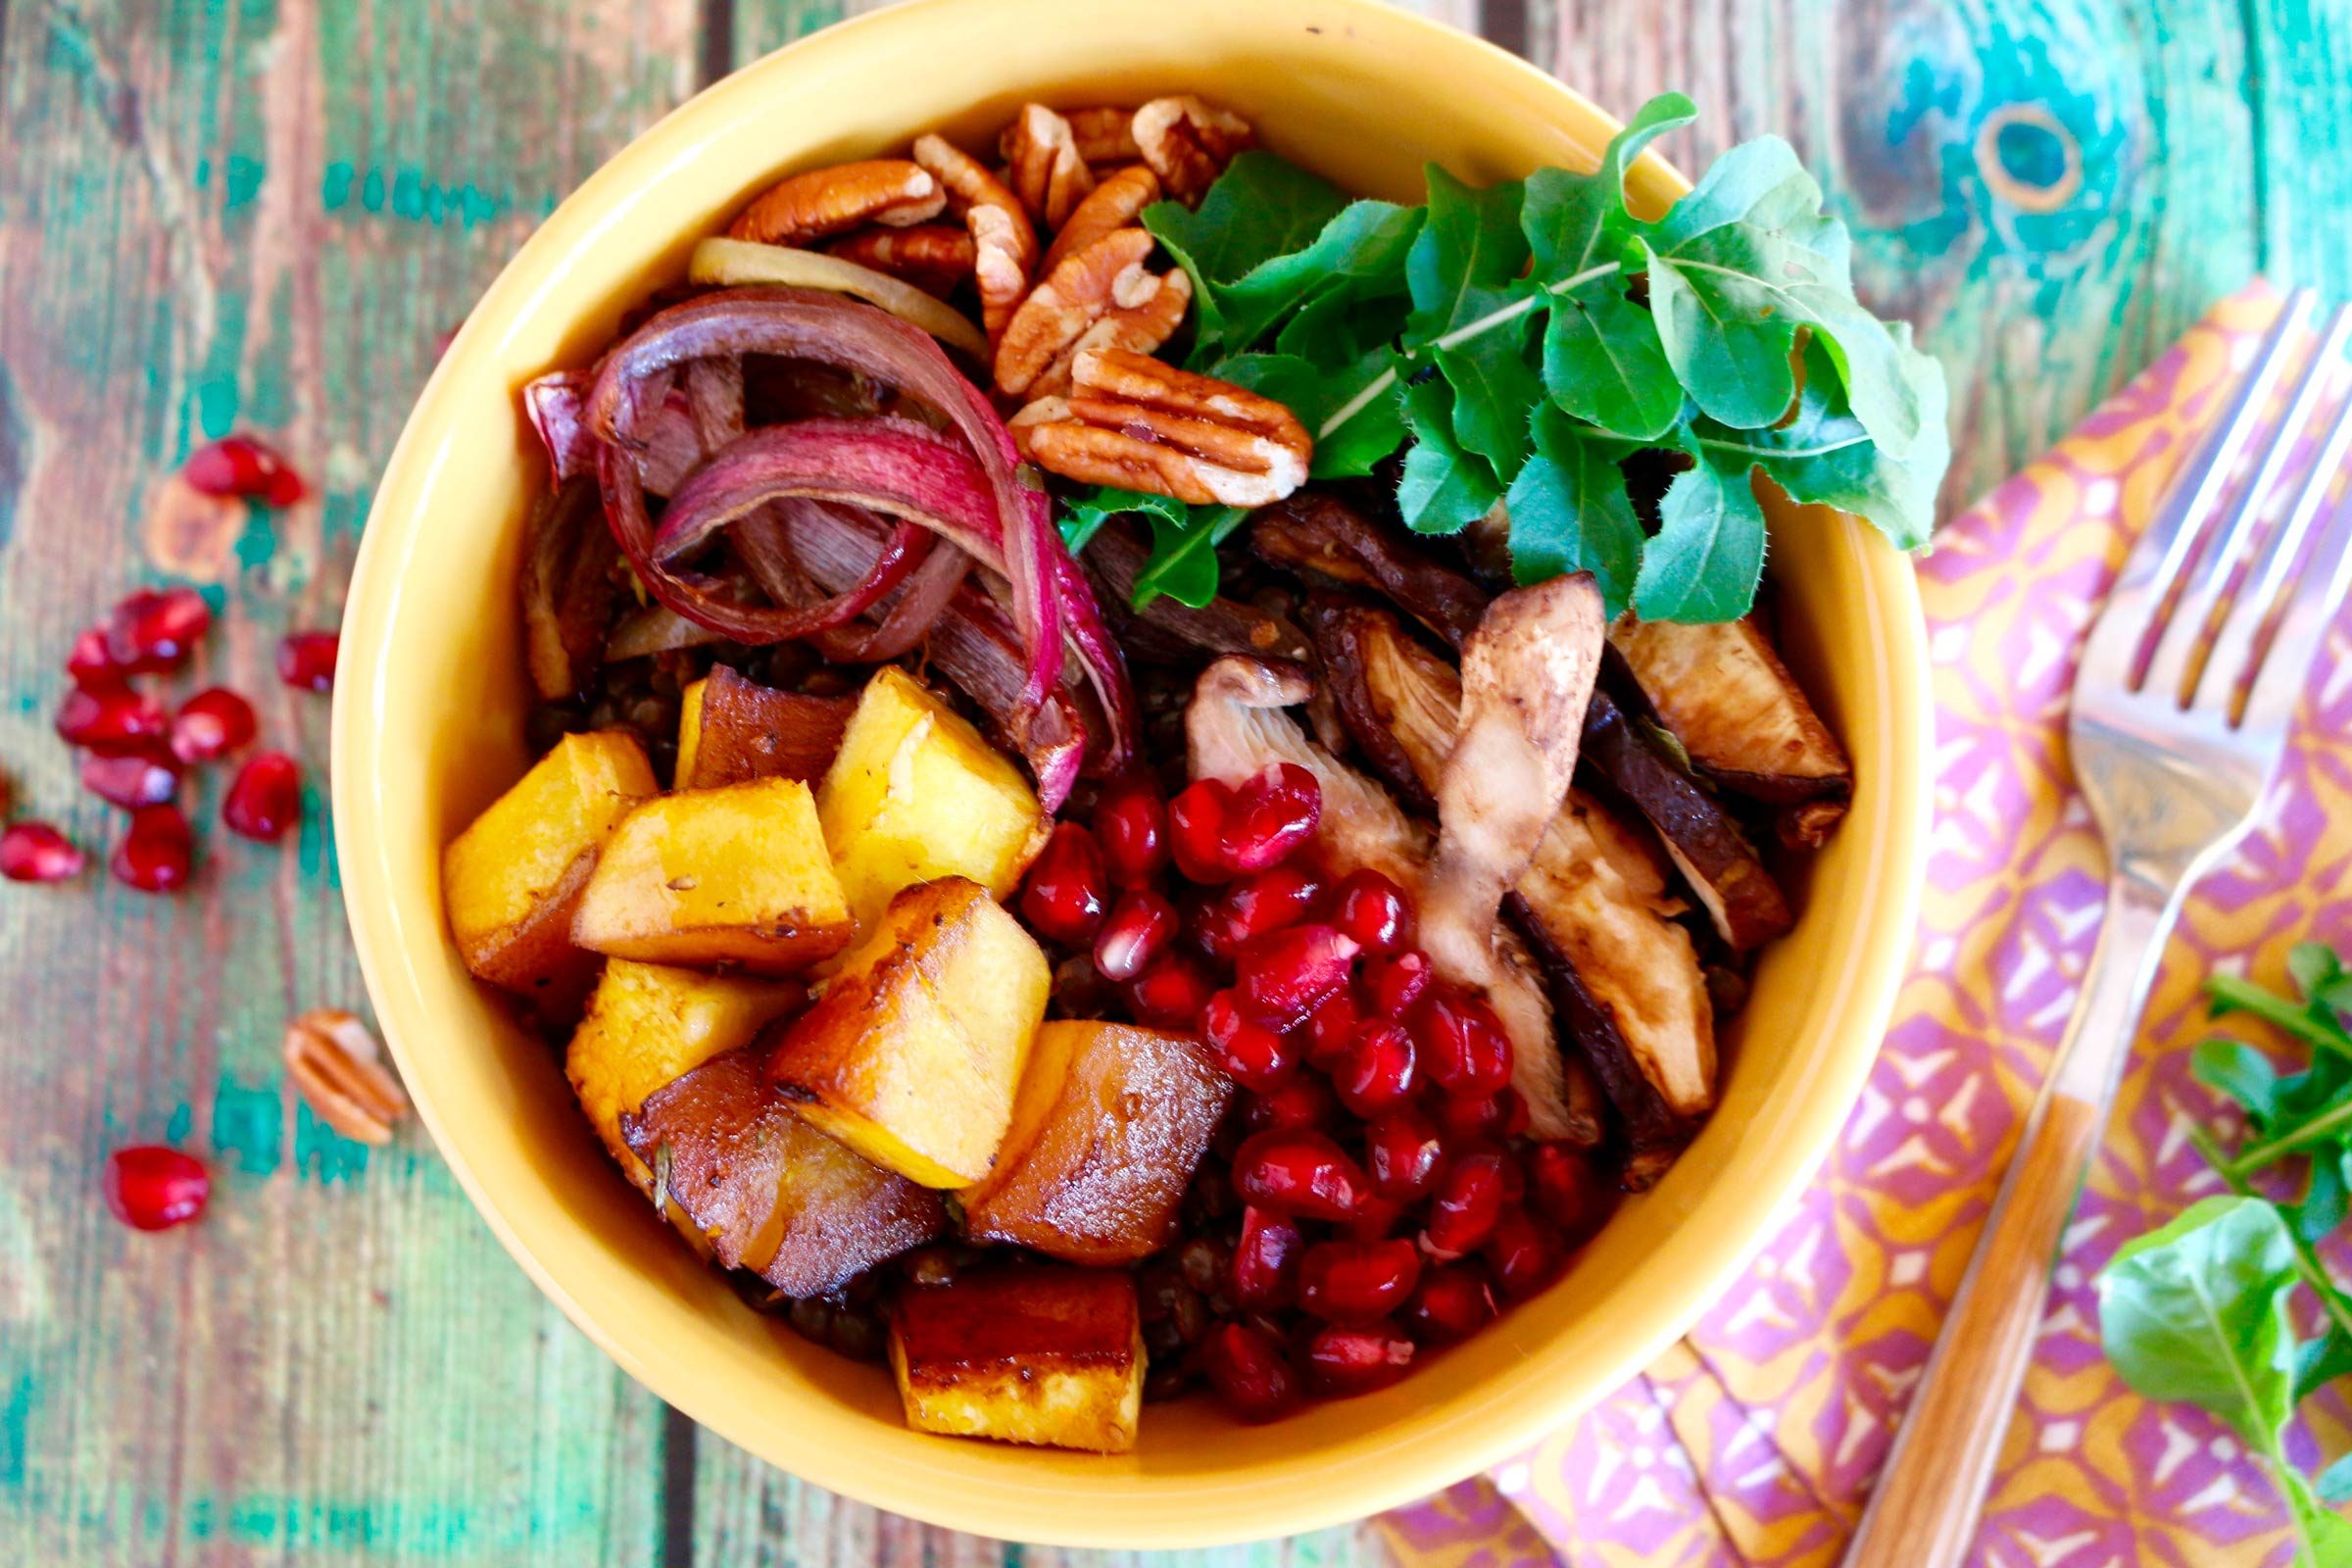 20 Deliciously Healthy Lunch Ideas That Aren't Salad